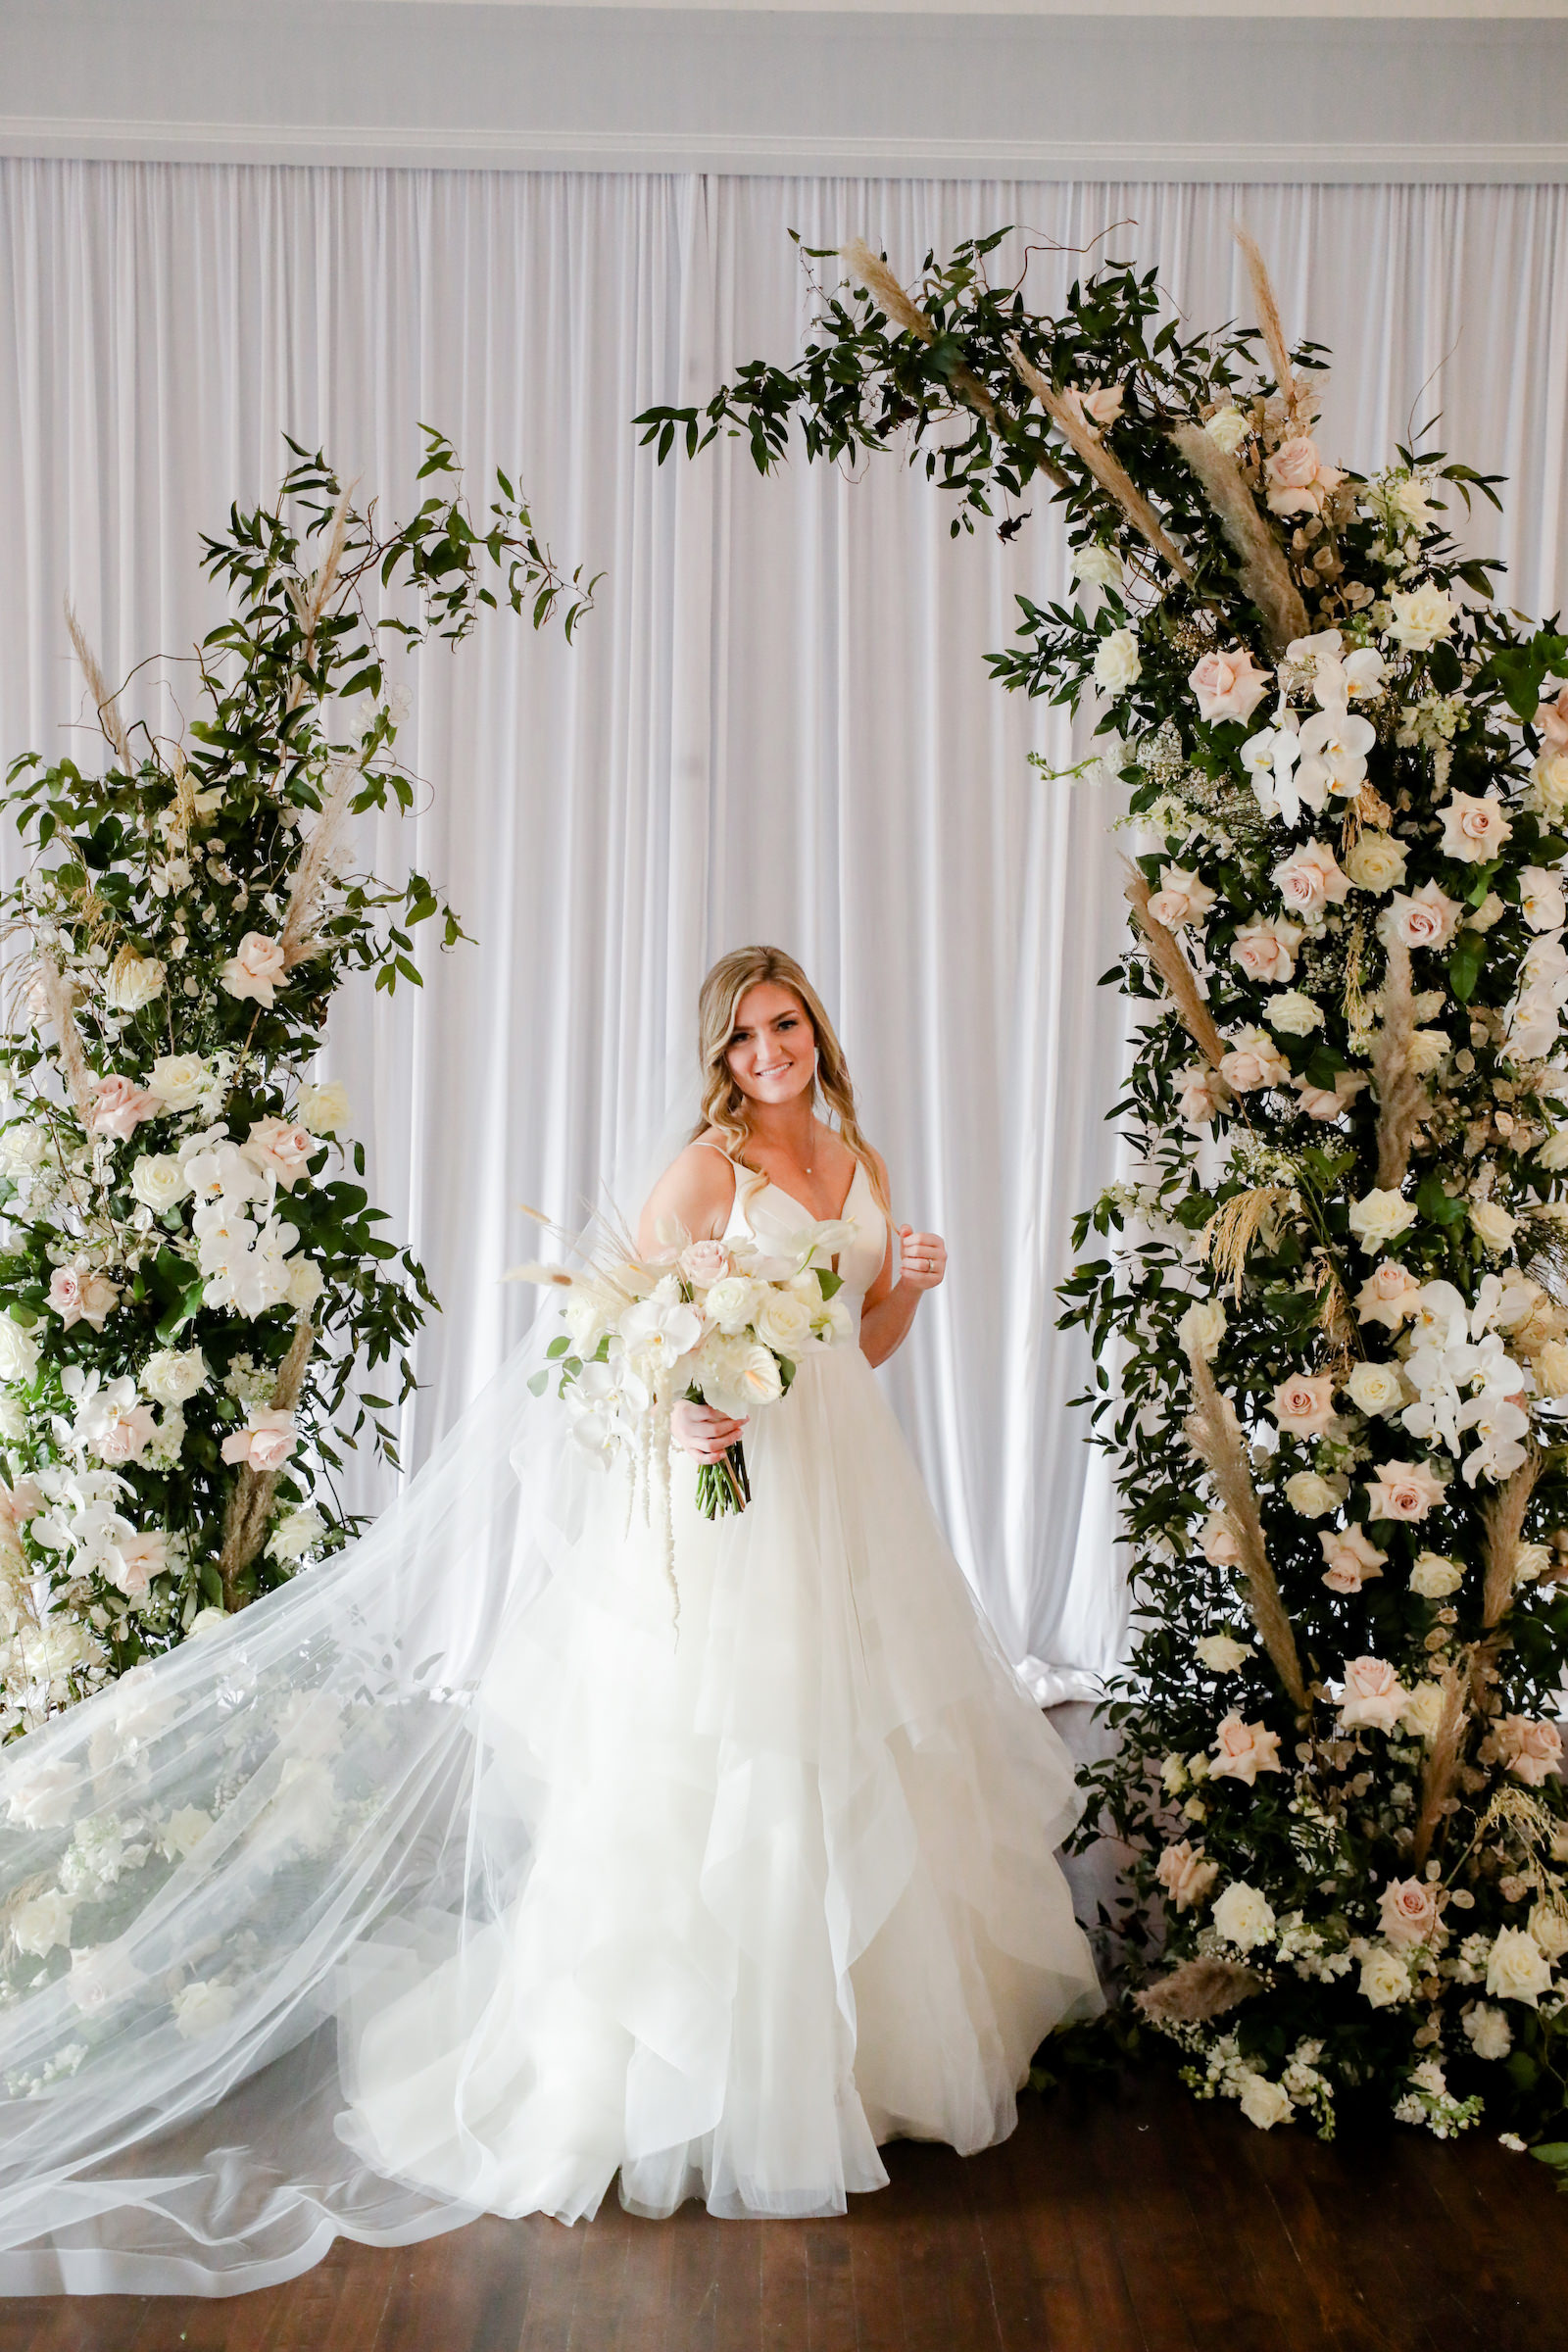 Romantic Blue Coastal Chic Wedding Ceremony Decor, Bride Wearing Tulle Ballgown Wedding Dress and Full Length Veil, Two Piece White Roses, Pampas Grass, Blush Pink Roses, Greenery Floral Two Piece Arch | Tampa Bay Wedding Photographer Lifelong Photography Studio